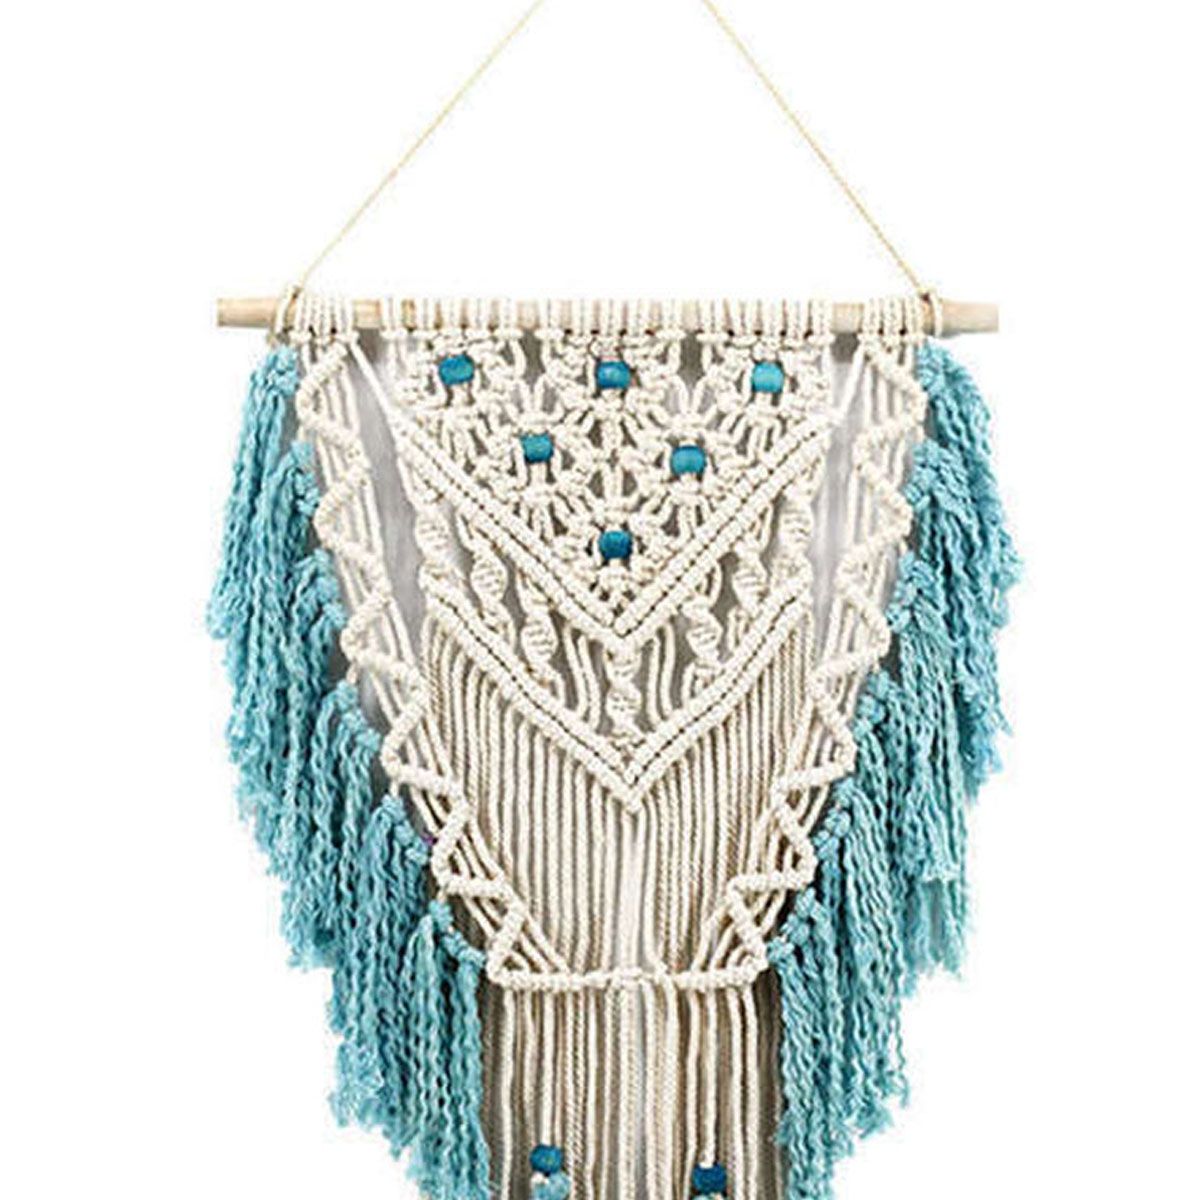 Hand-Knotted-Macrame-Wall-Art-Handmade-Bohemian-Hanging-Tapestry-Room-Decorations-1637667